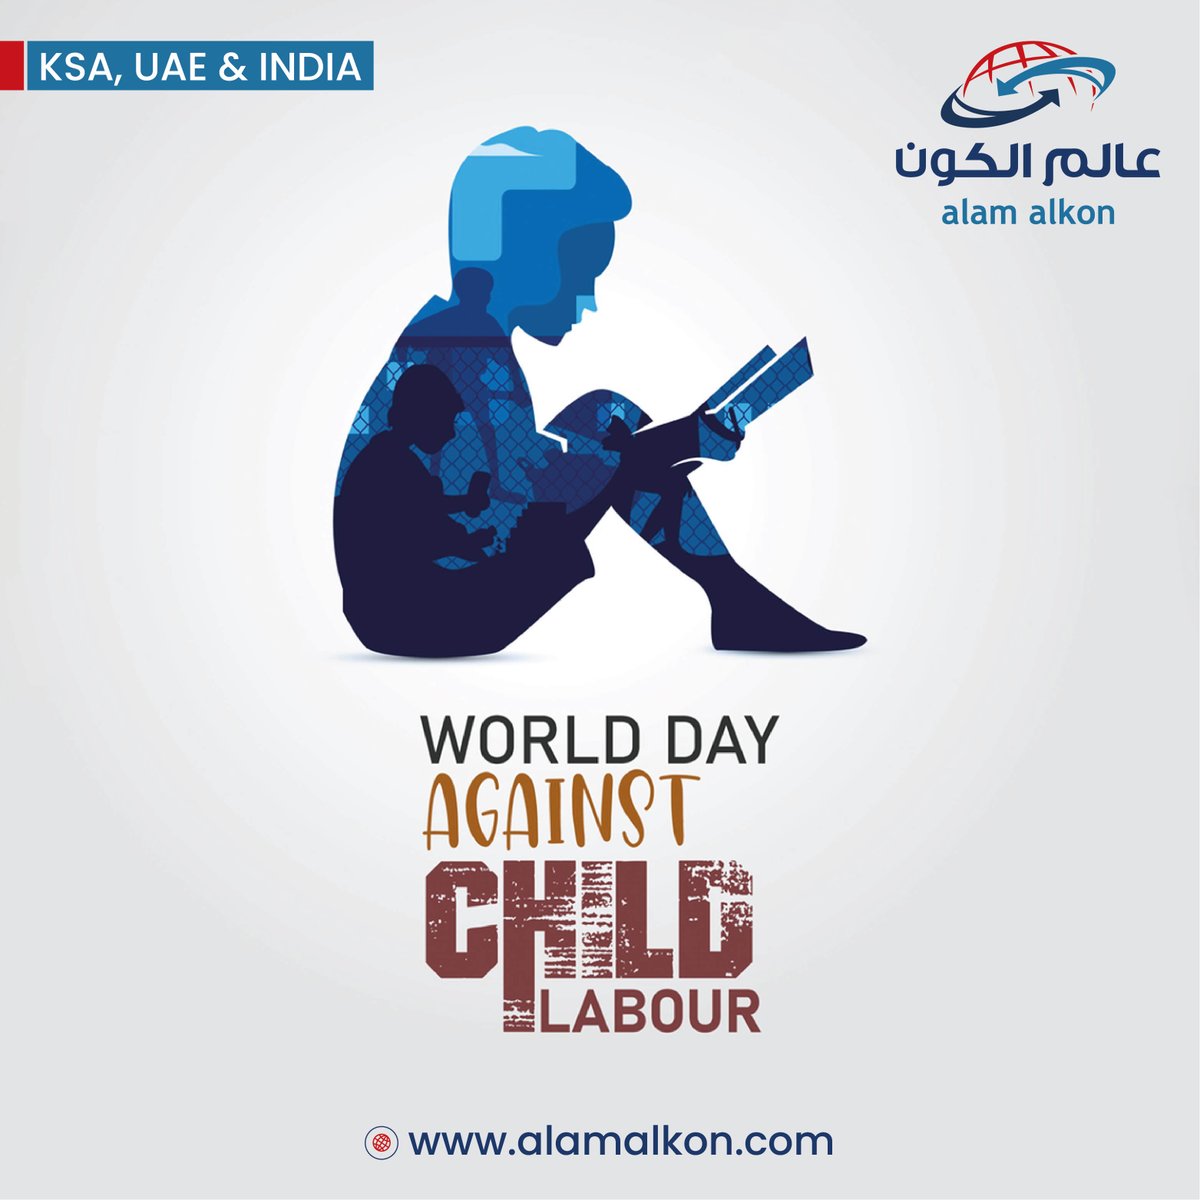 let's ensure that every child is protected, empowered, and given the opportunity to thrive. Join us in spreading awareness by sharing this post and using #WorldDayAgainstChildLabor. Together, we can make a difference and create a world where children are free to be children.